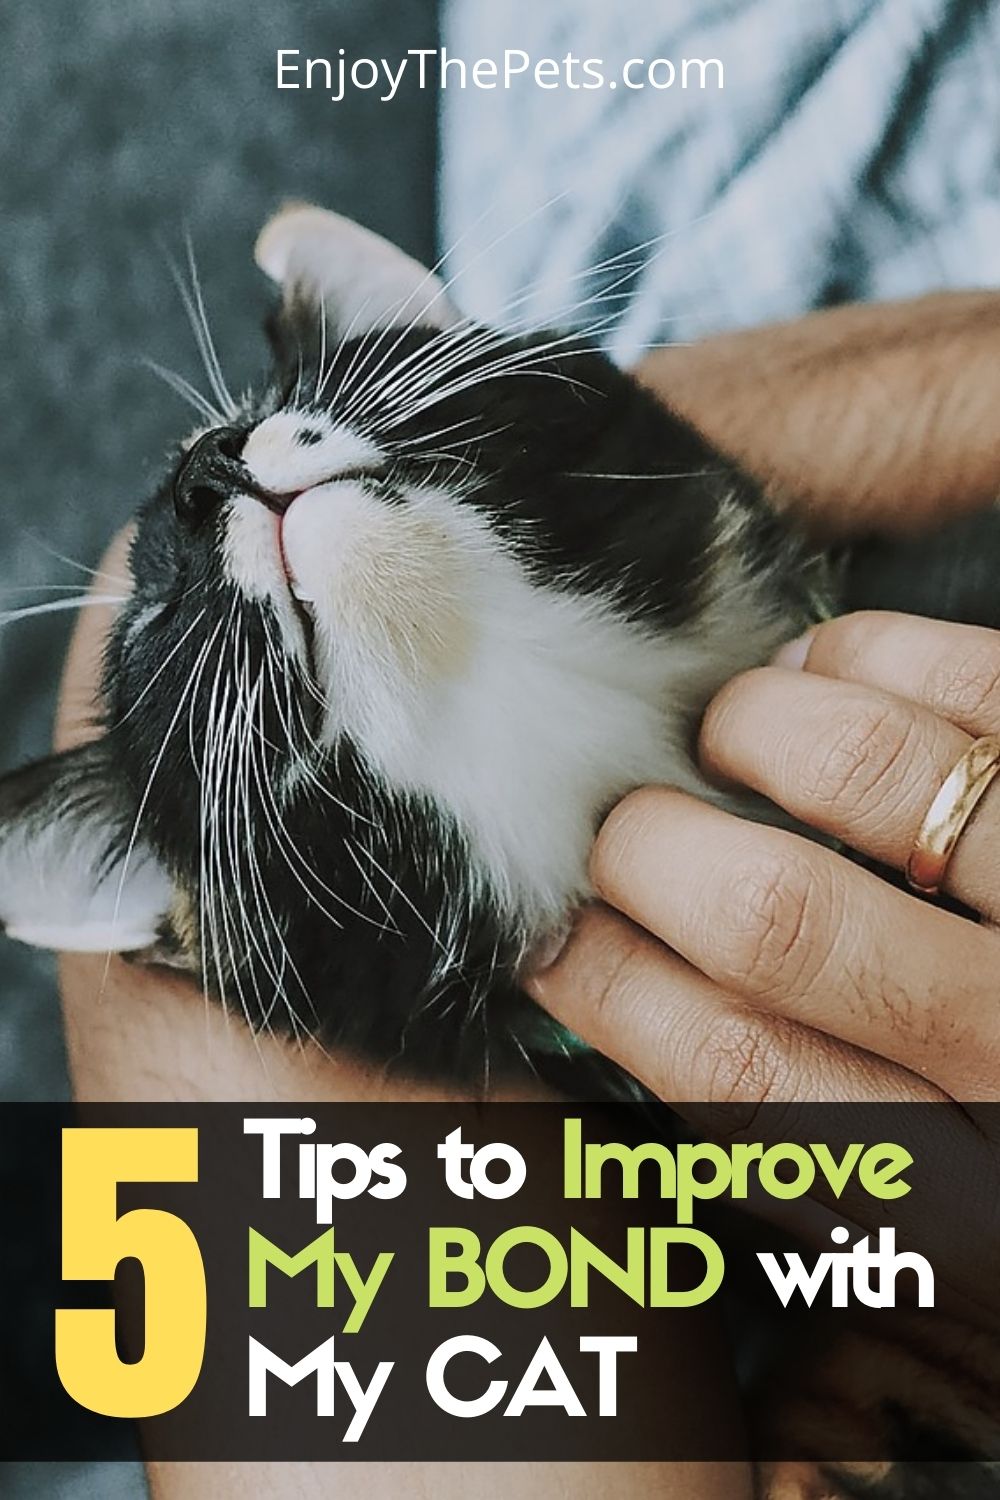 Improve the bond with your cat